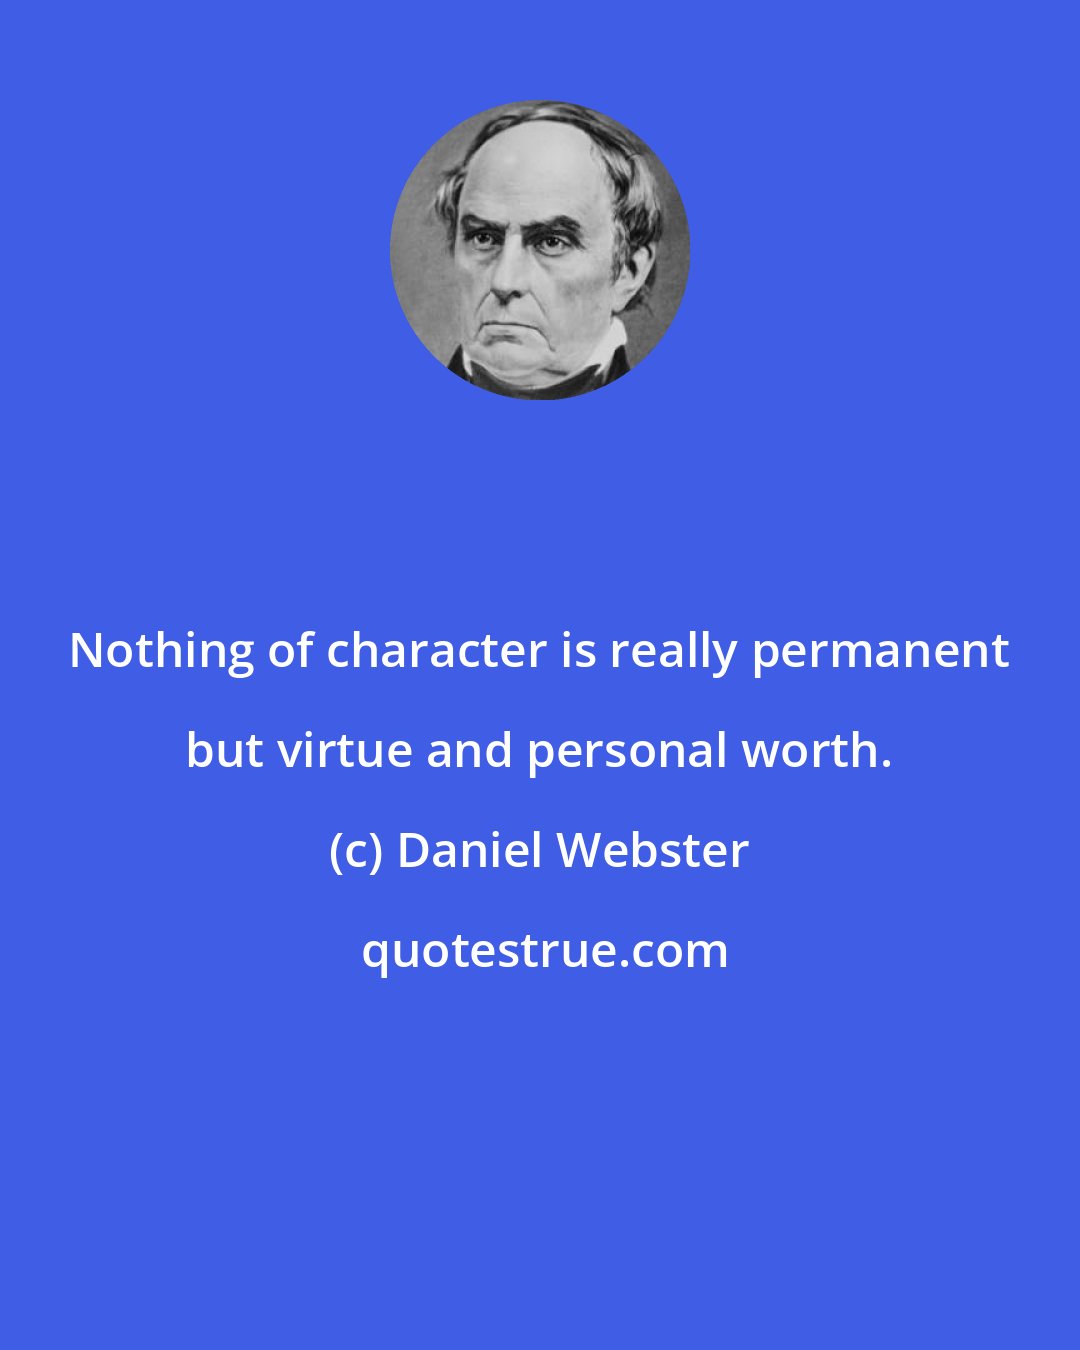 Daniel Webster: Nothing of character is really permanent but virtue and personal worth.